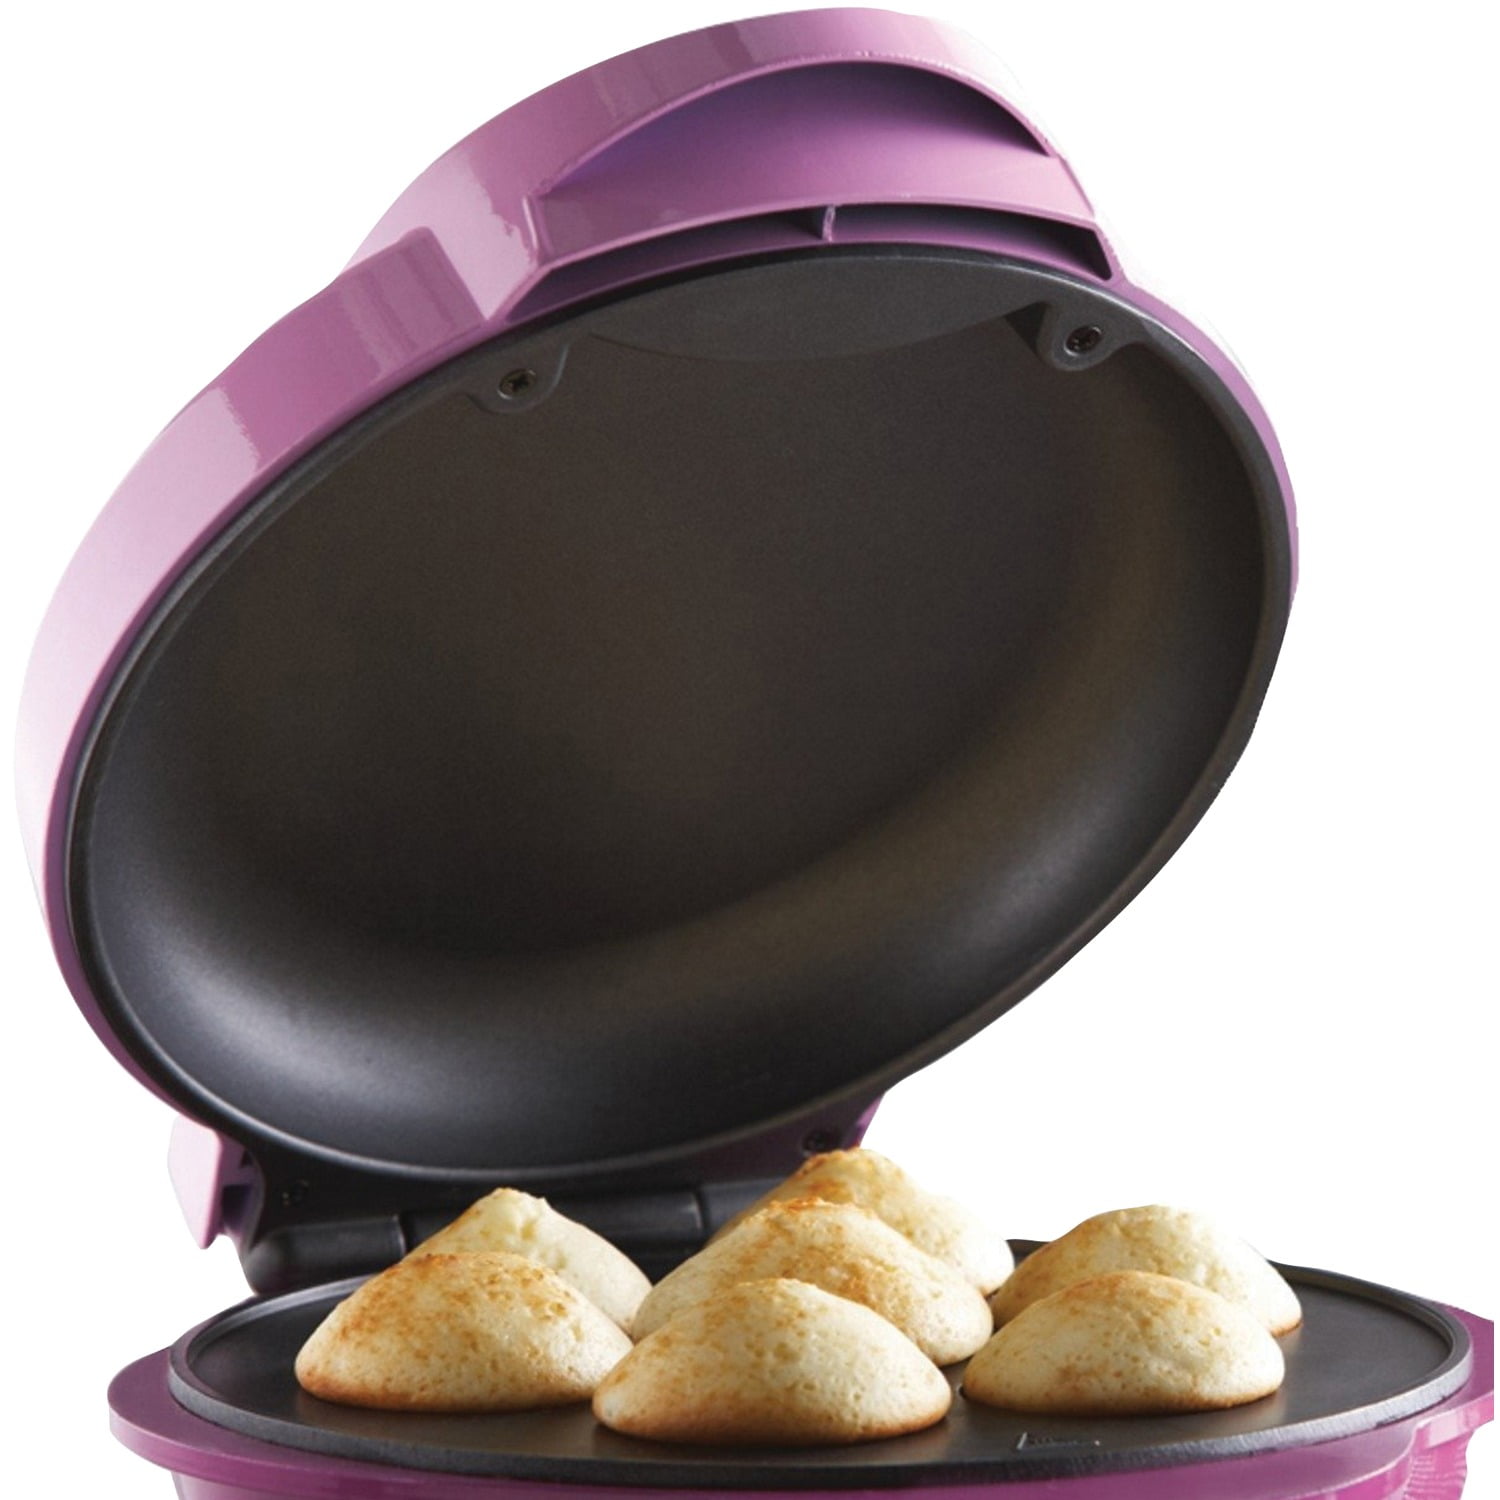 Brentwood Appliances Just For Fun TS-252 Nonstick Electric Food